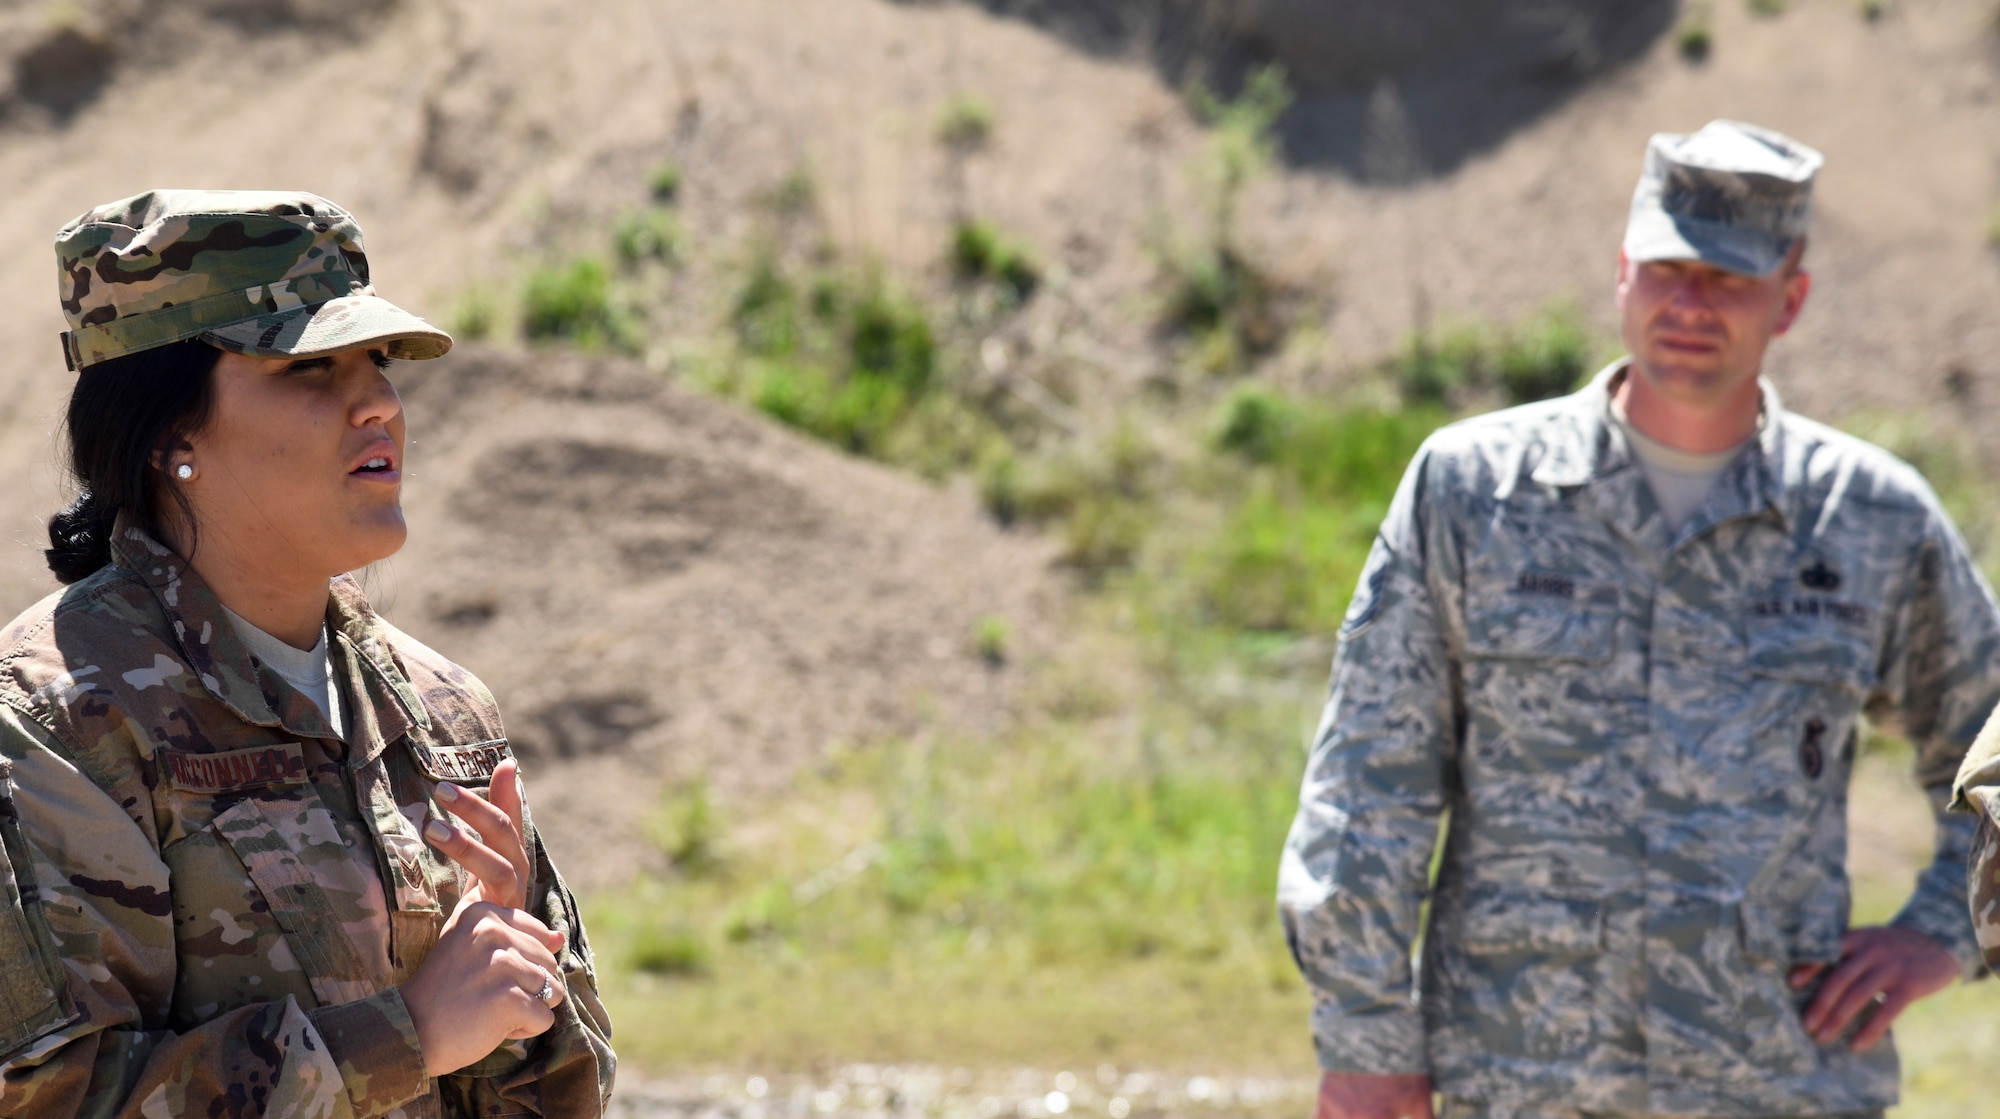 Staff Sgt. Makayla McConnell, 114th Security Forces Squadron security response team member, instructs her fellow Airmen on proper tactical squad movements May 6, 2017, on a training site near Sioux Falls S.D. McConnell is the first female from the 114th Security Forces Squadron to attend and complete Combat Leadership School. (U.S. Air National Guard photo by Staff Sgt. Duane Duimstra/Released)